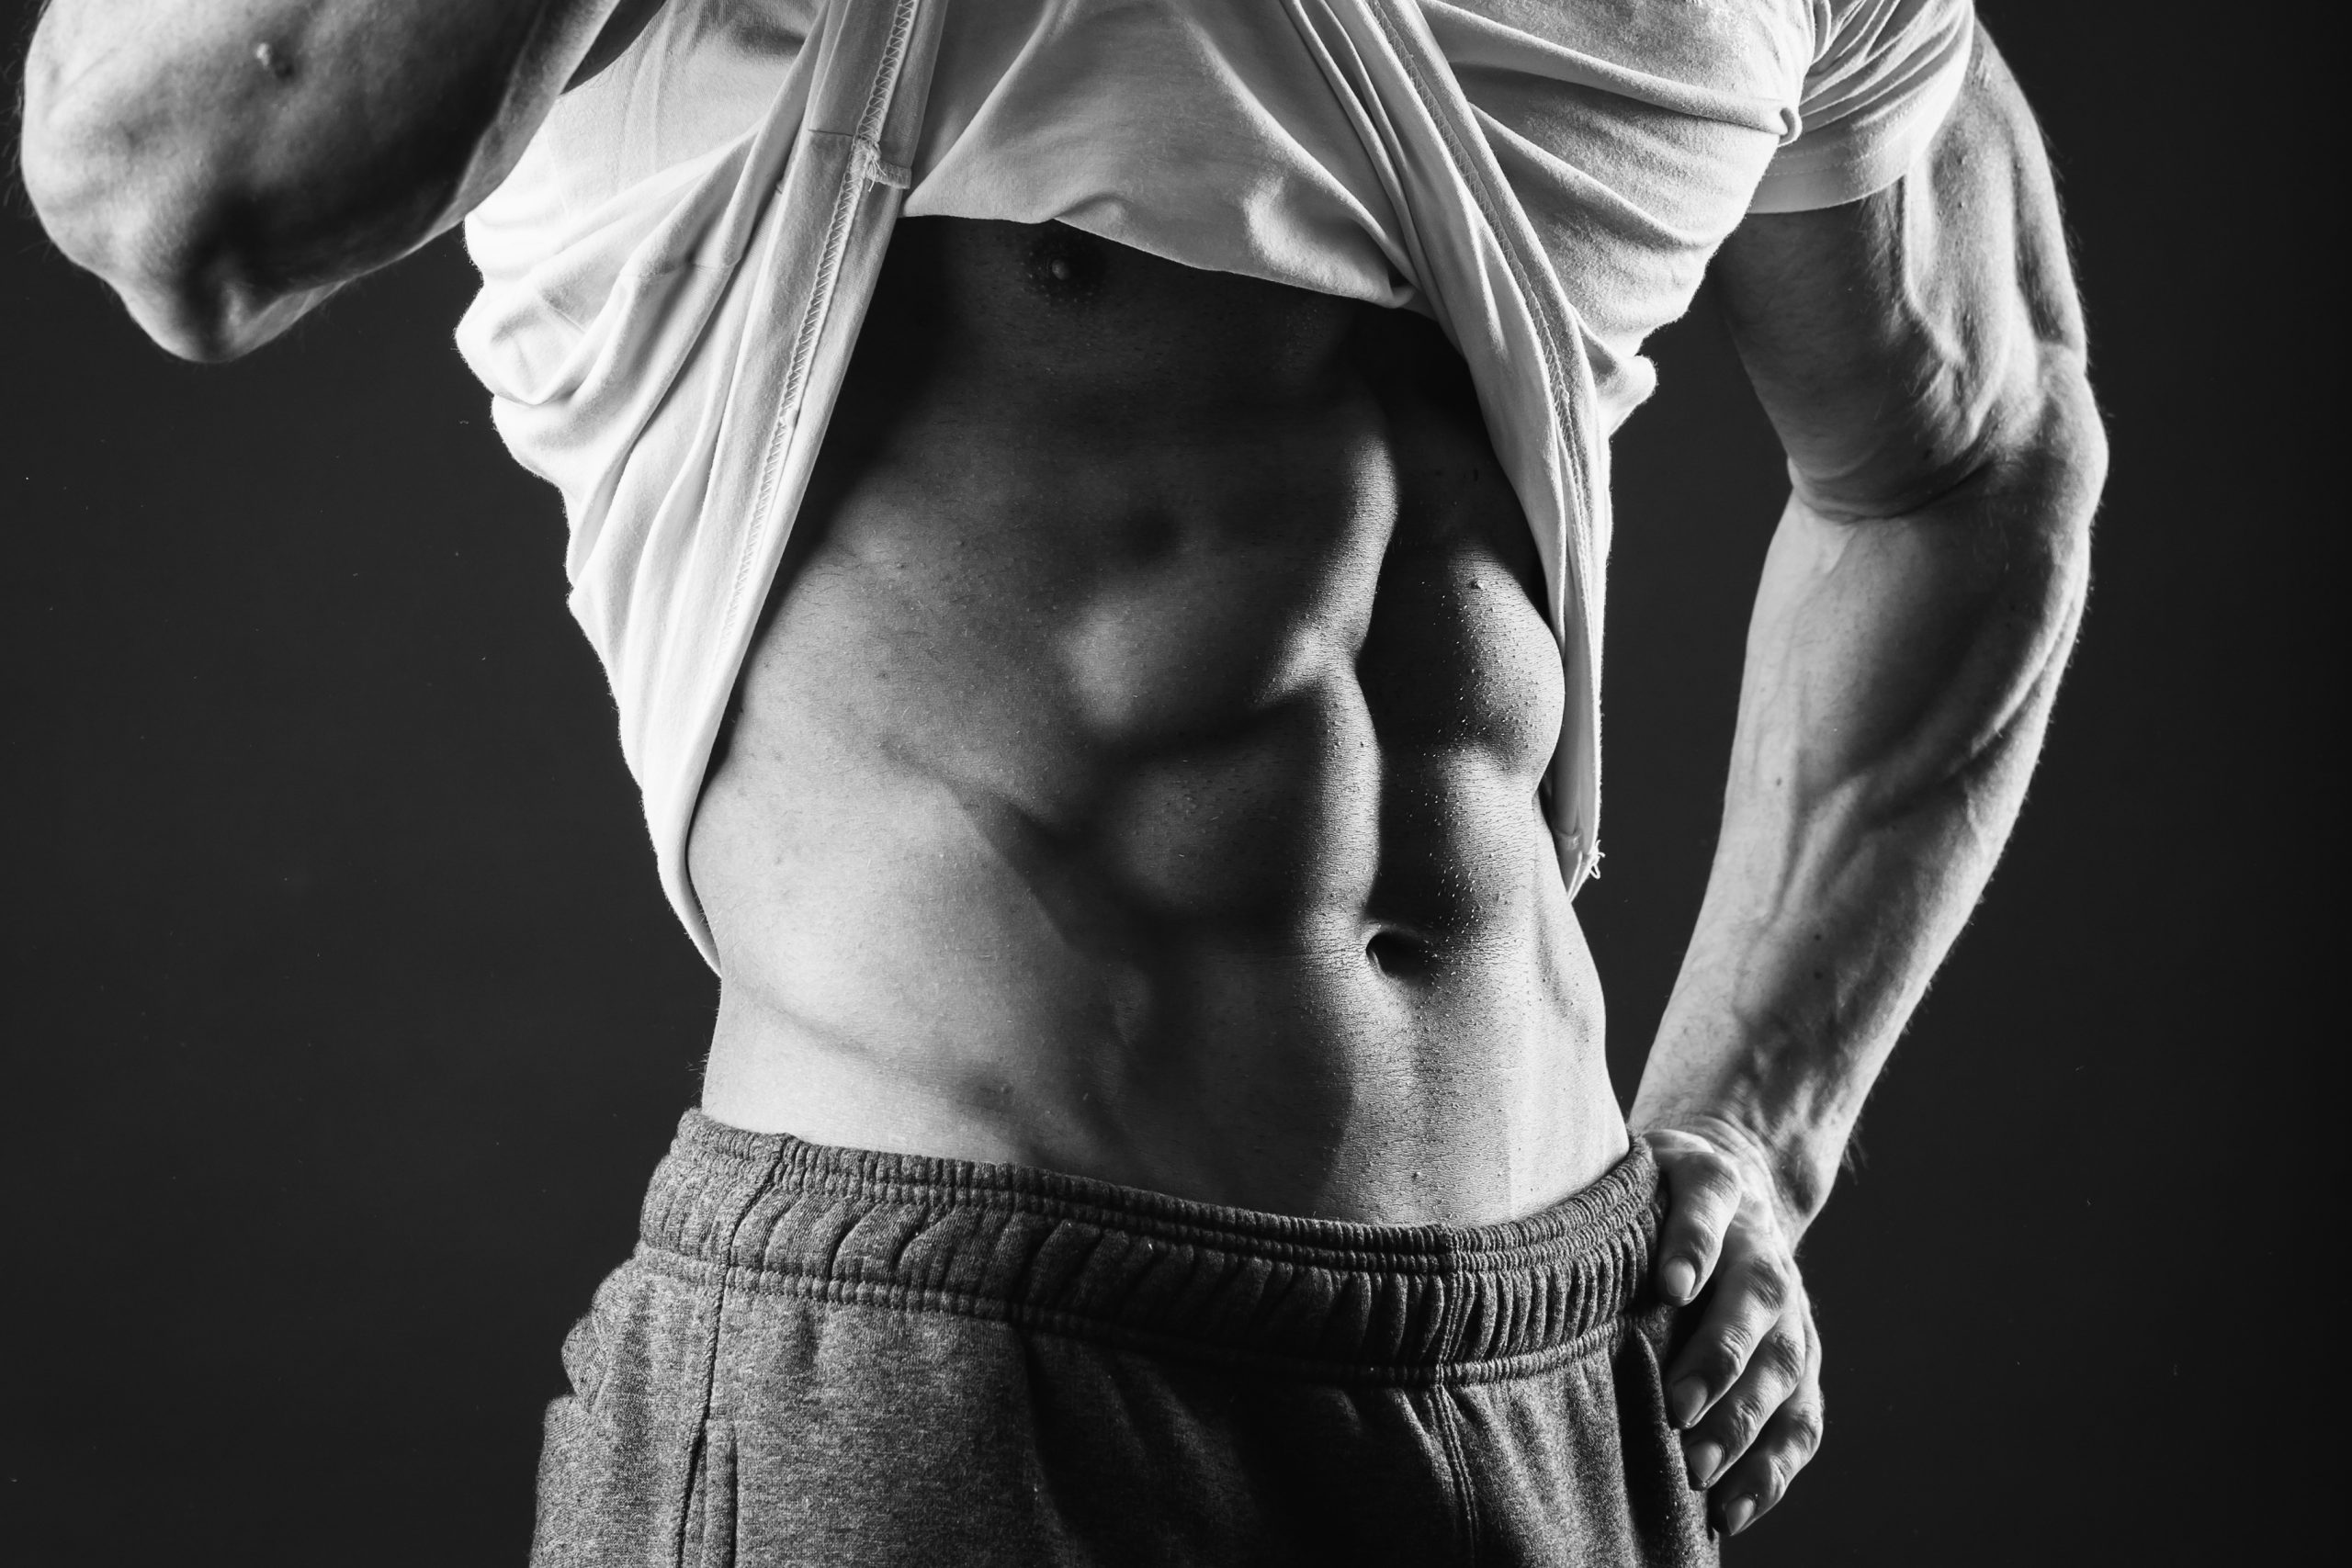 Quick Ab Workout: 10 Minutes to Great Abs